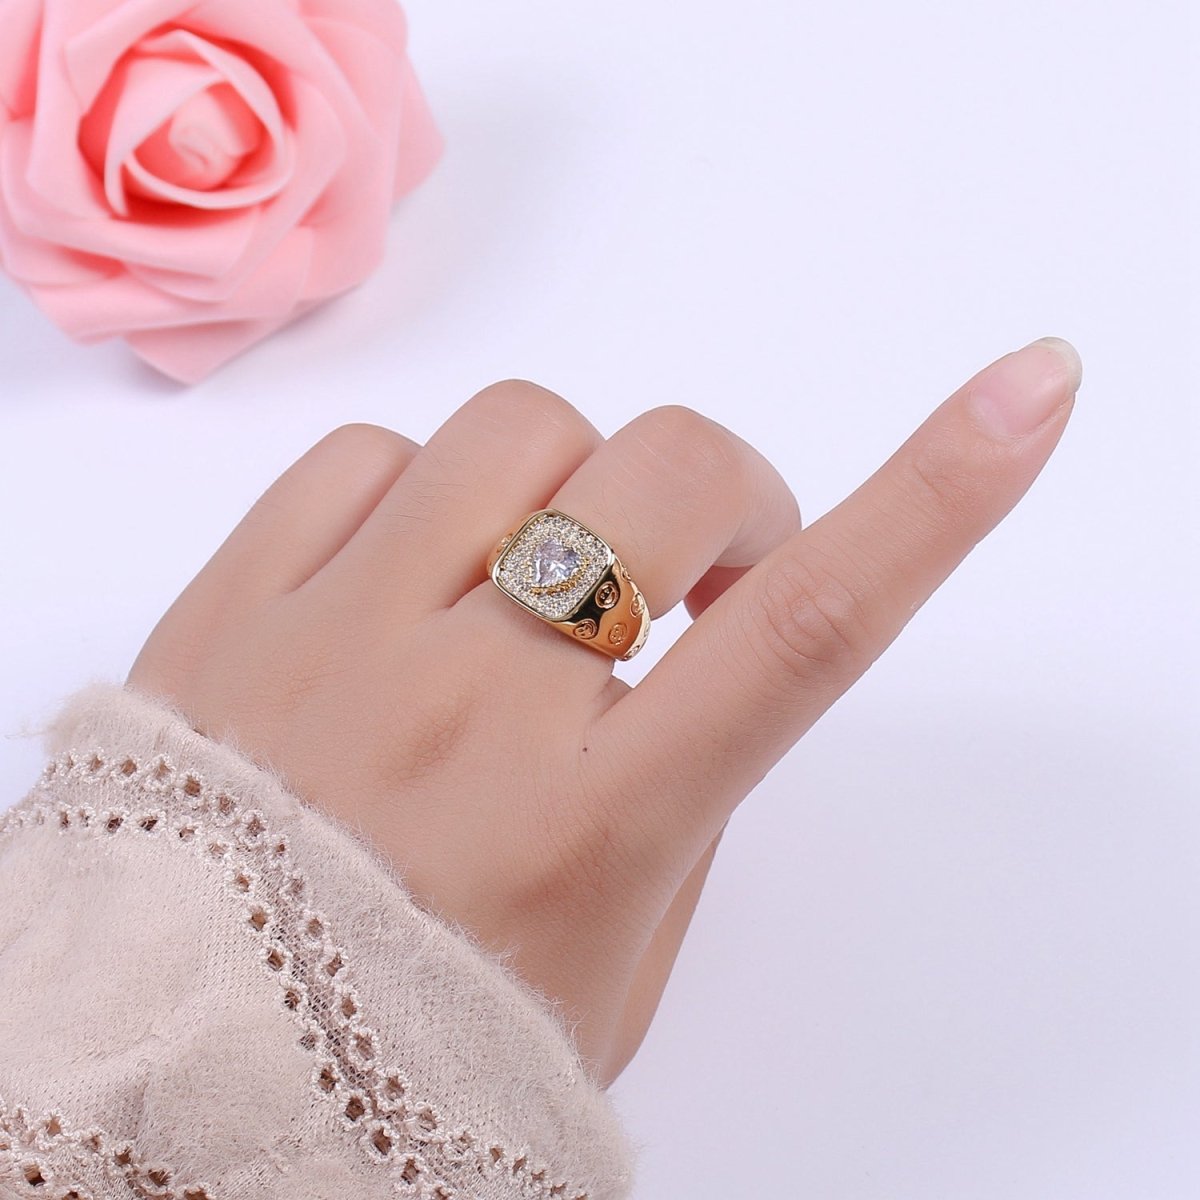 Happy Face Ring Gold Filled Heart Ring Simple Gold Signet Ring Open Ring for Stacking Jewelry us size 6.5 S-254 ~ S-257 - DLUXCA